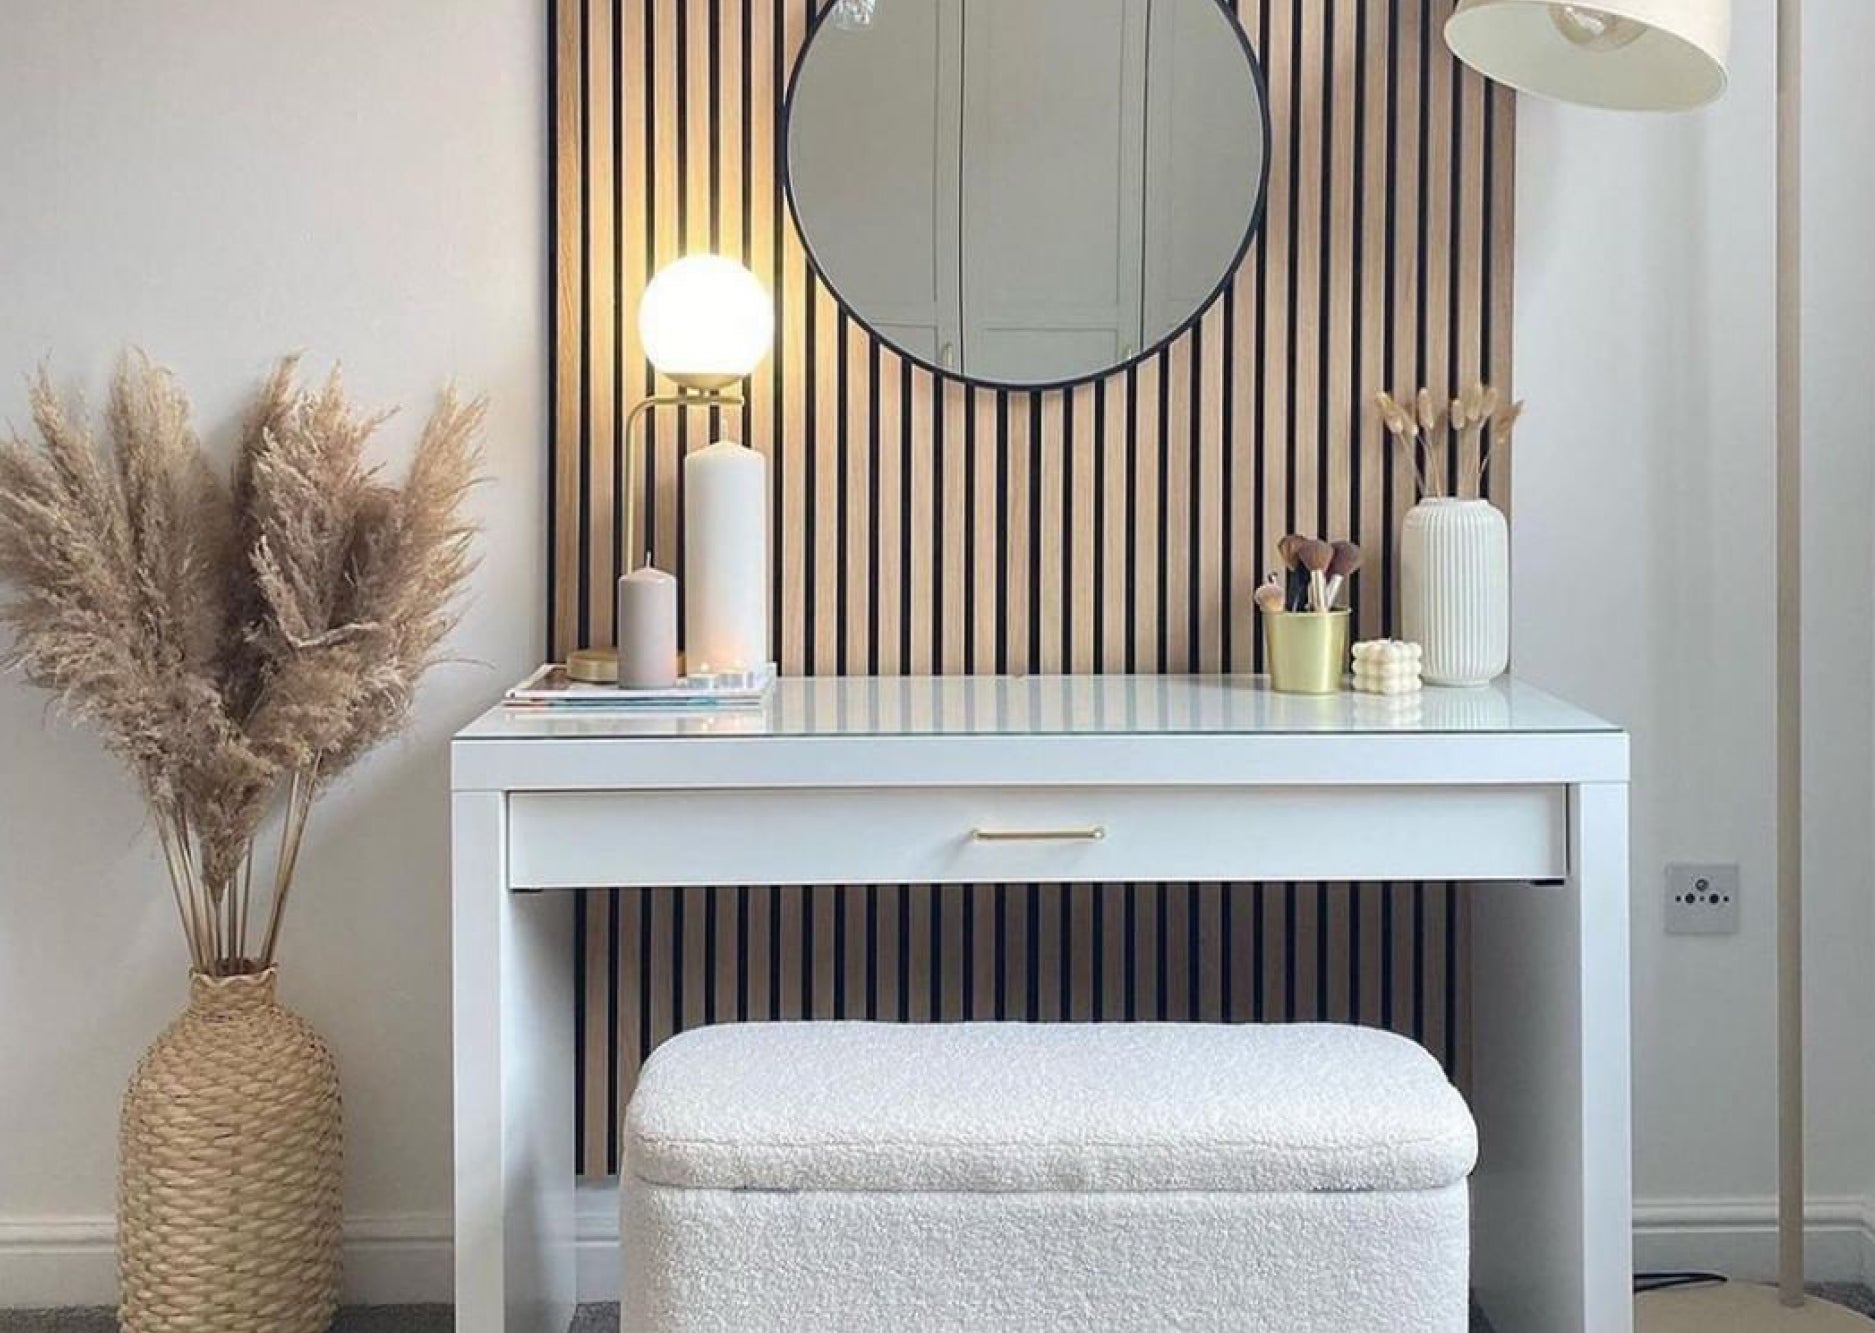 White desk used as a vanity space in a home. Naturewall slatwall panel on the wall behind with a hanging mirror